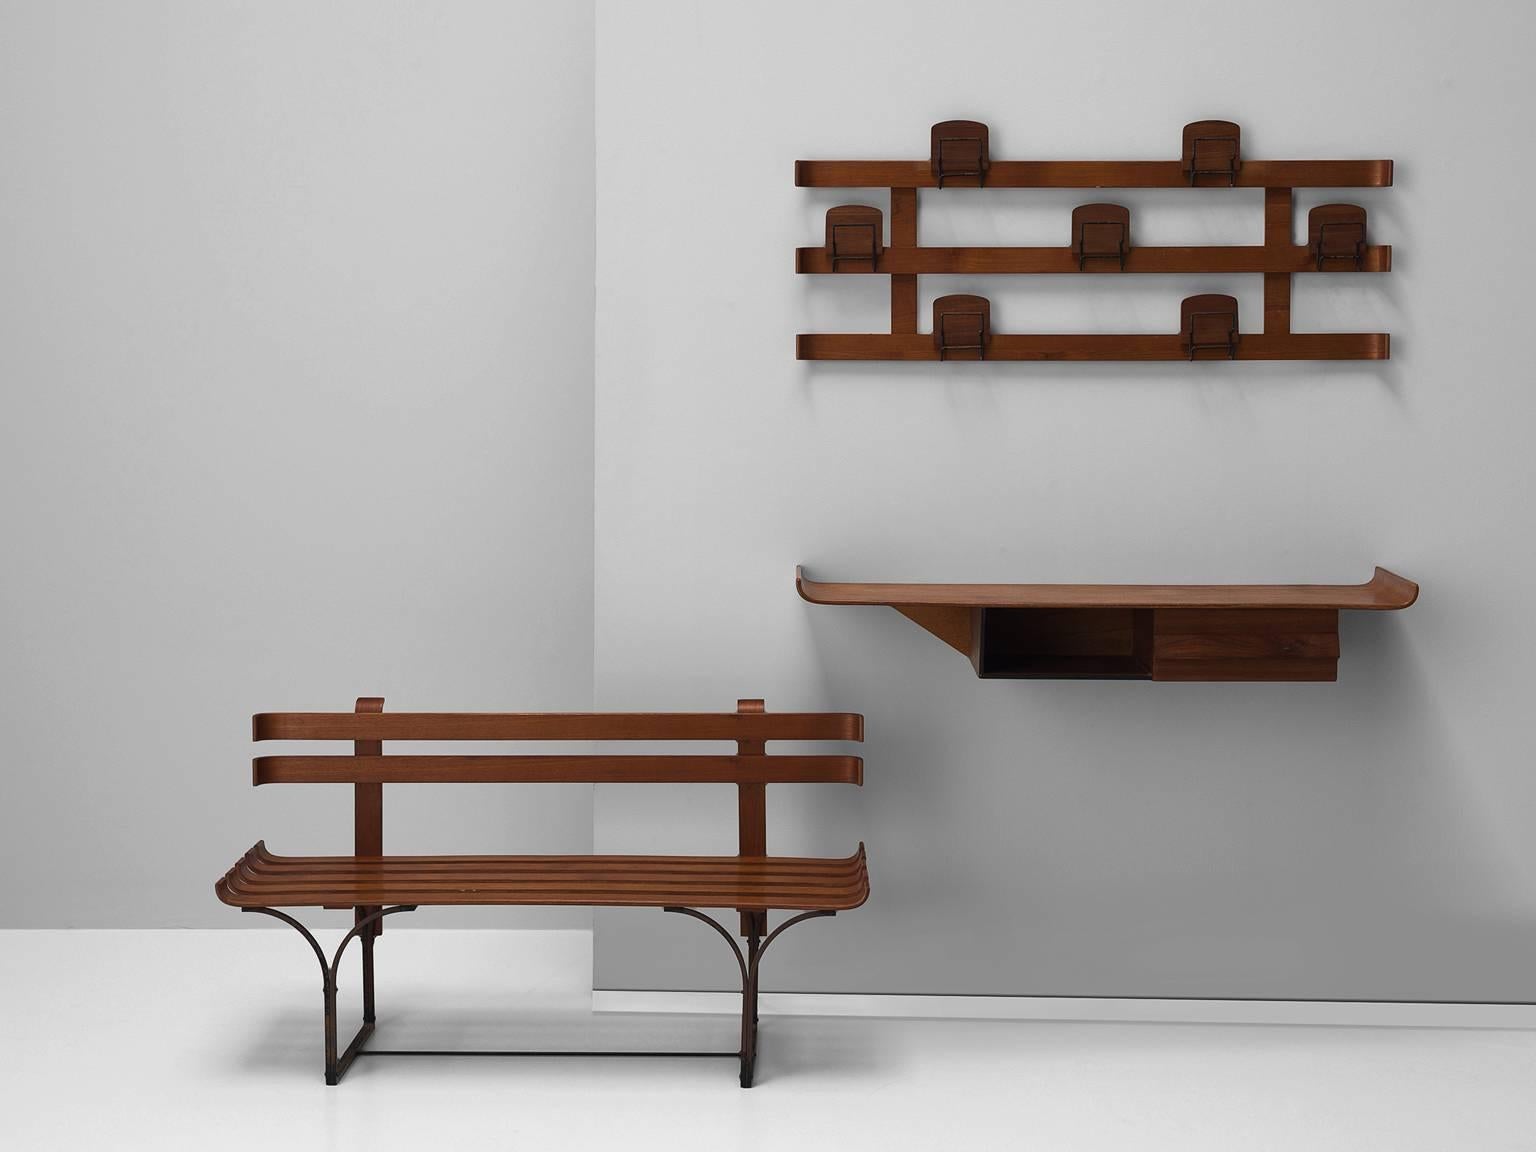 Vestibule set including shelf, bench and coat rack, walnut and steel, Italy, 1950s

This elegant set is an ensemble of a coat rack, shelf and bench. The set is executed in warm walnut and features many Fine details such as the upward bent edges of